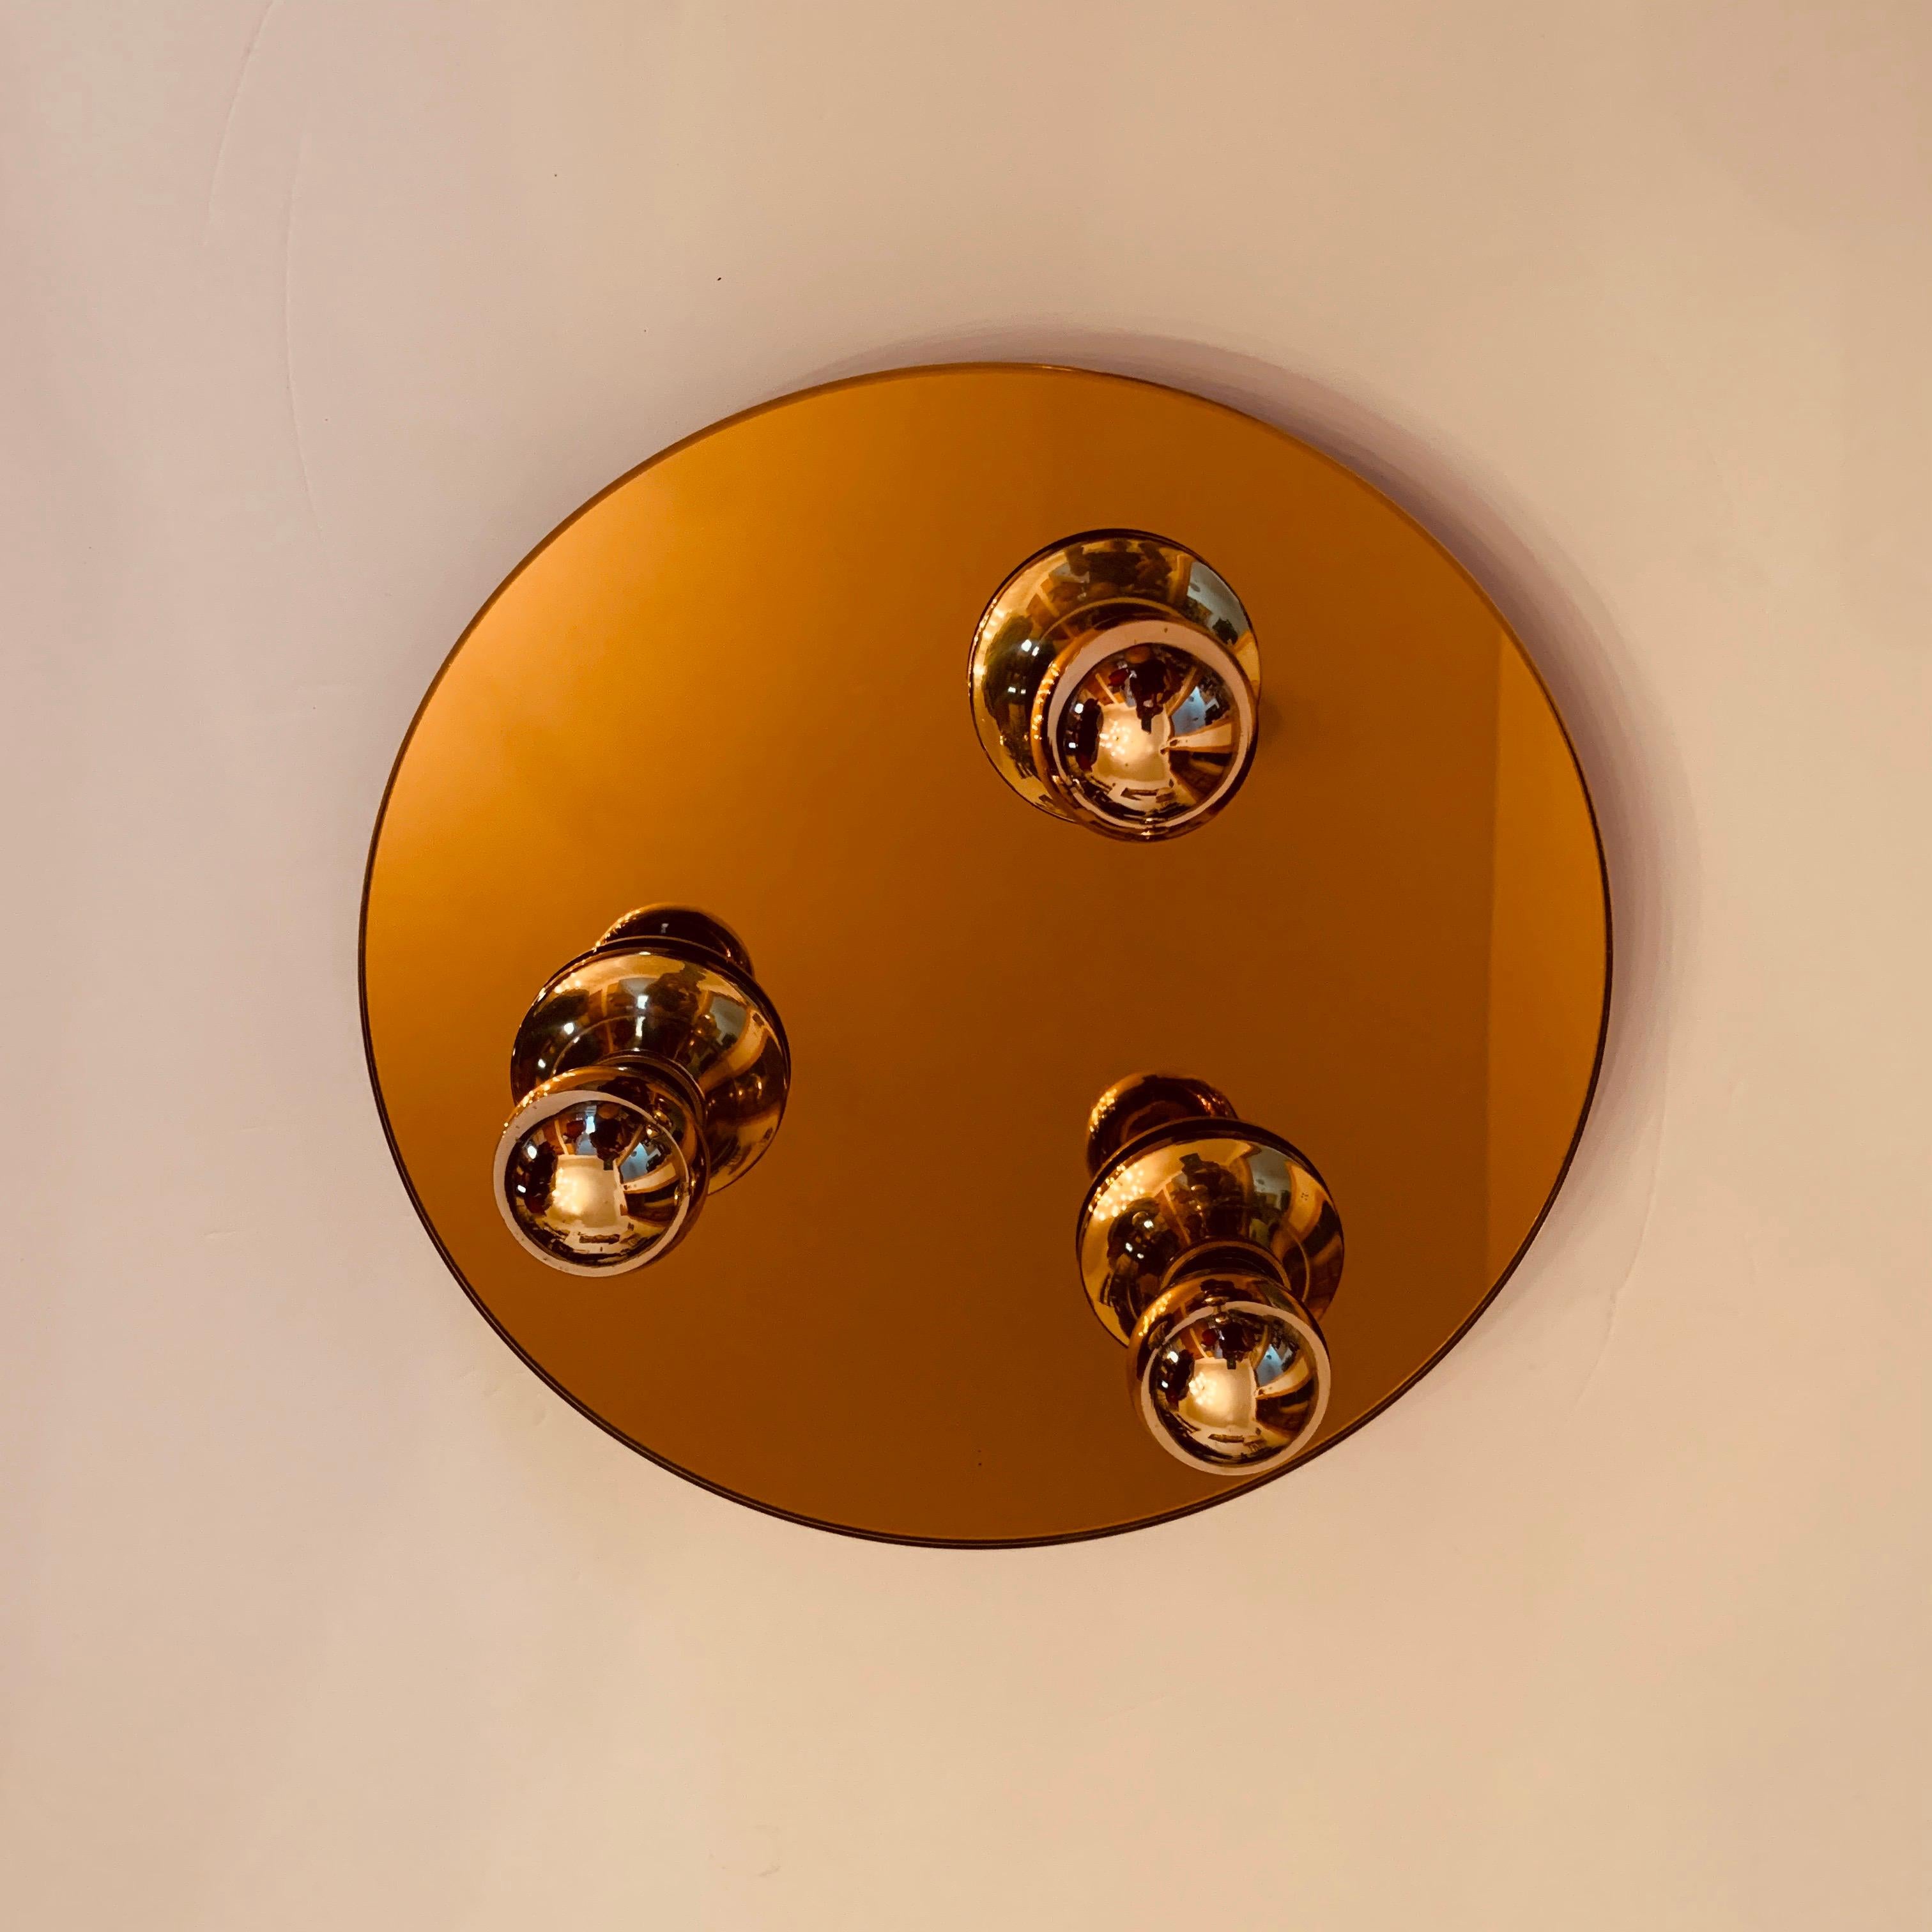 1960s Space Age Modernist Flush Light In Excellent Condition For Sale In New York, NY